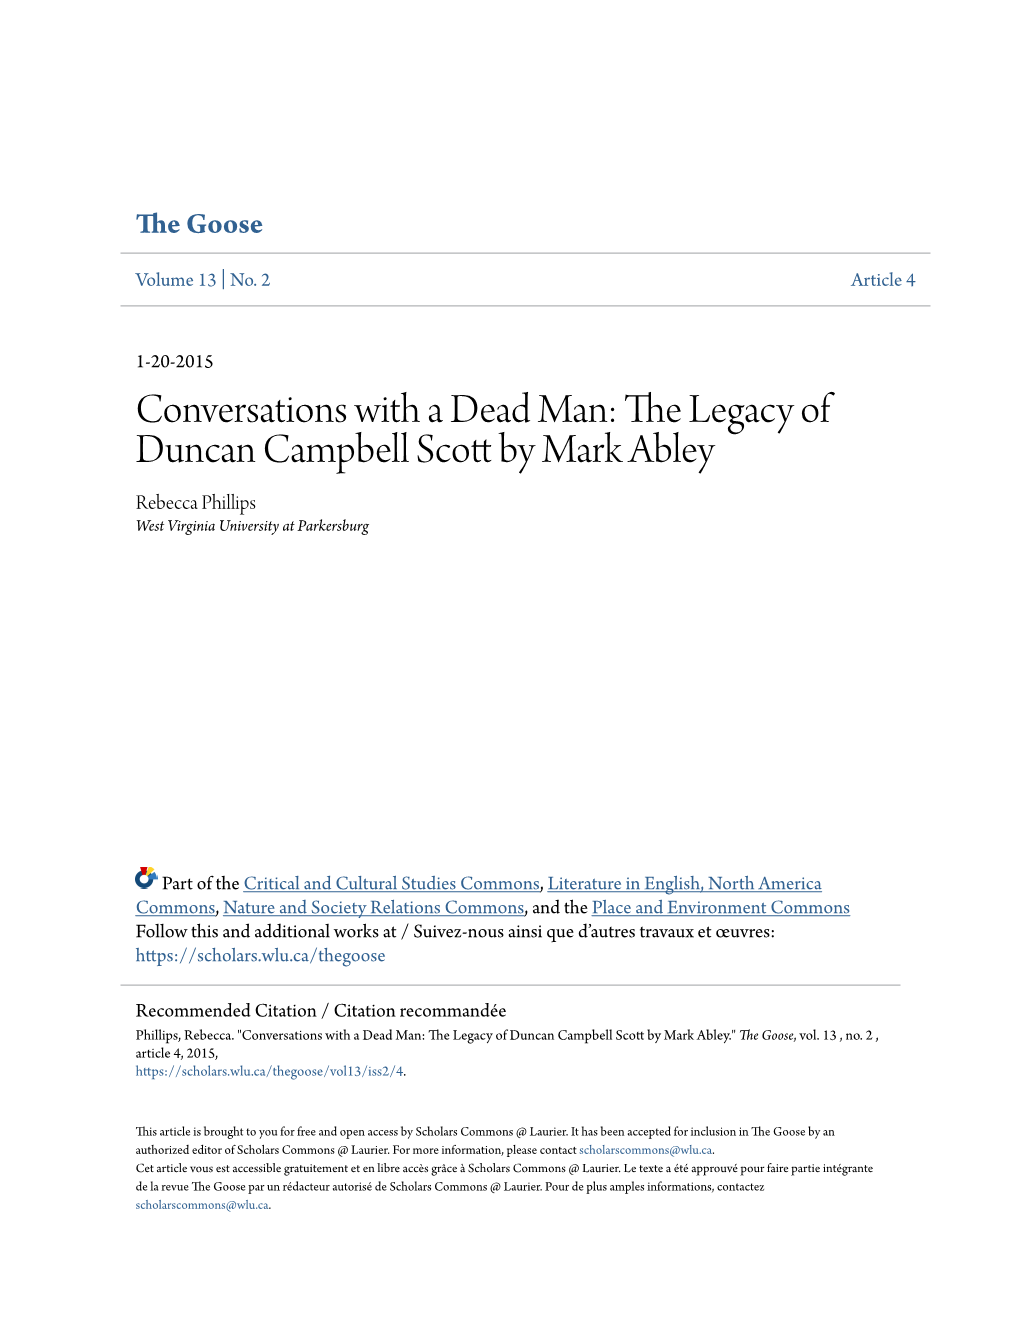 The Legacy of Duncan Campbell Scott by Mark Abley